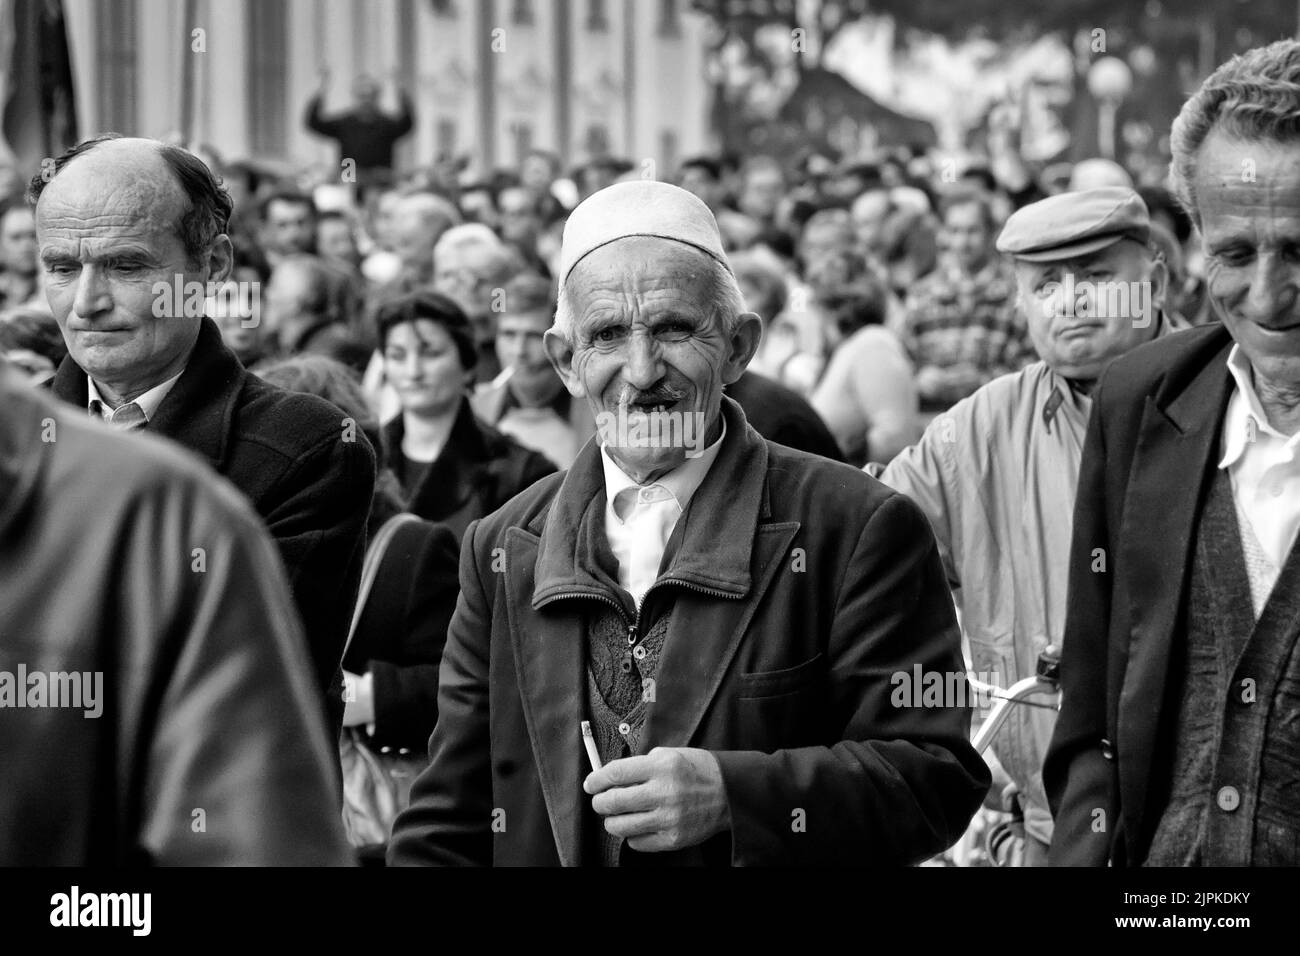 Crowds of people at political demonstration, Tirana, Albania Stock Photo